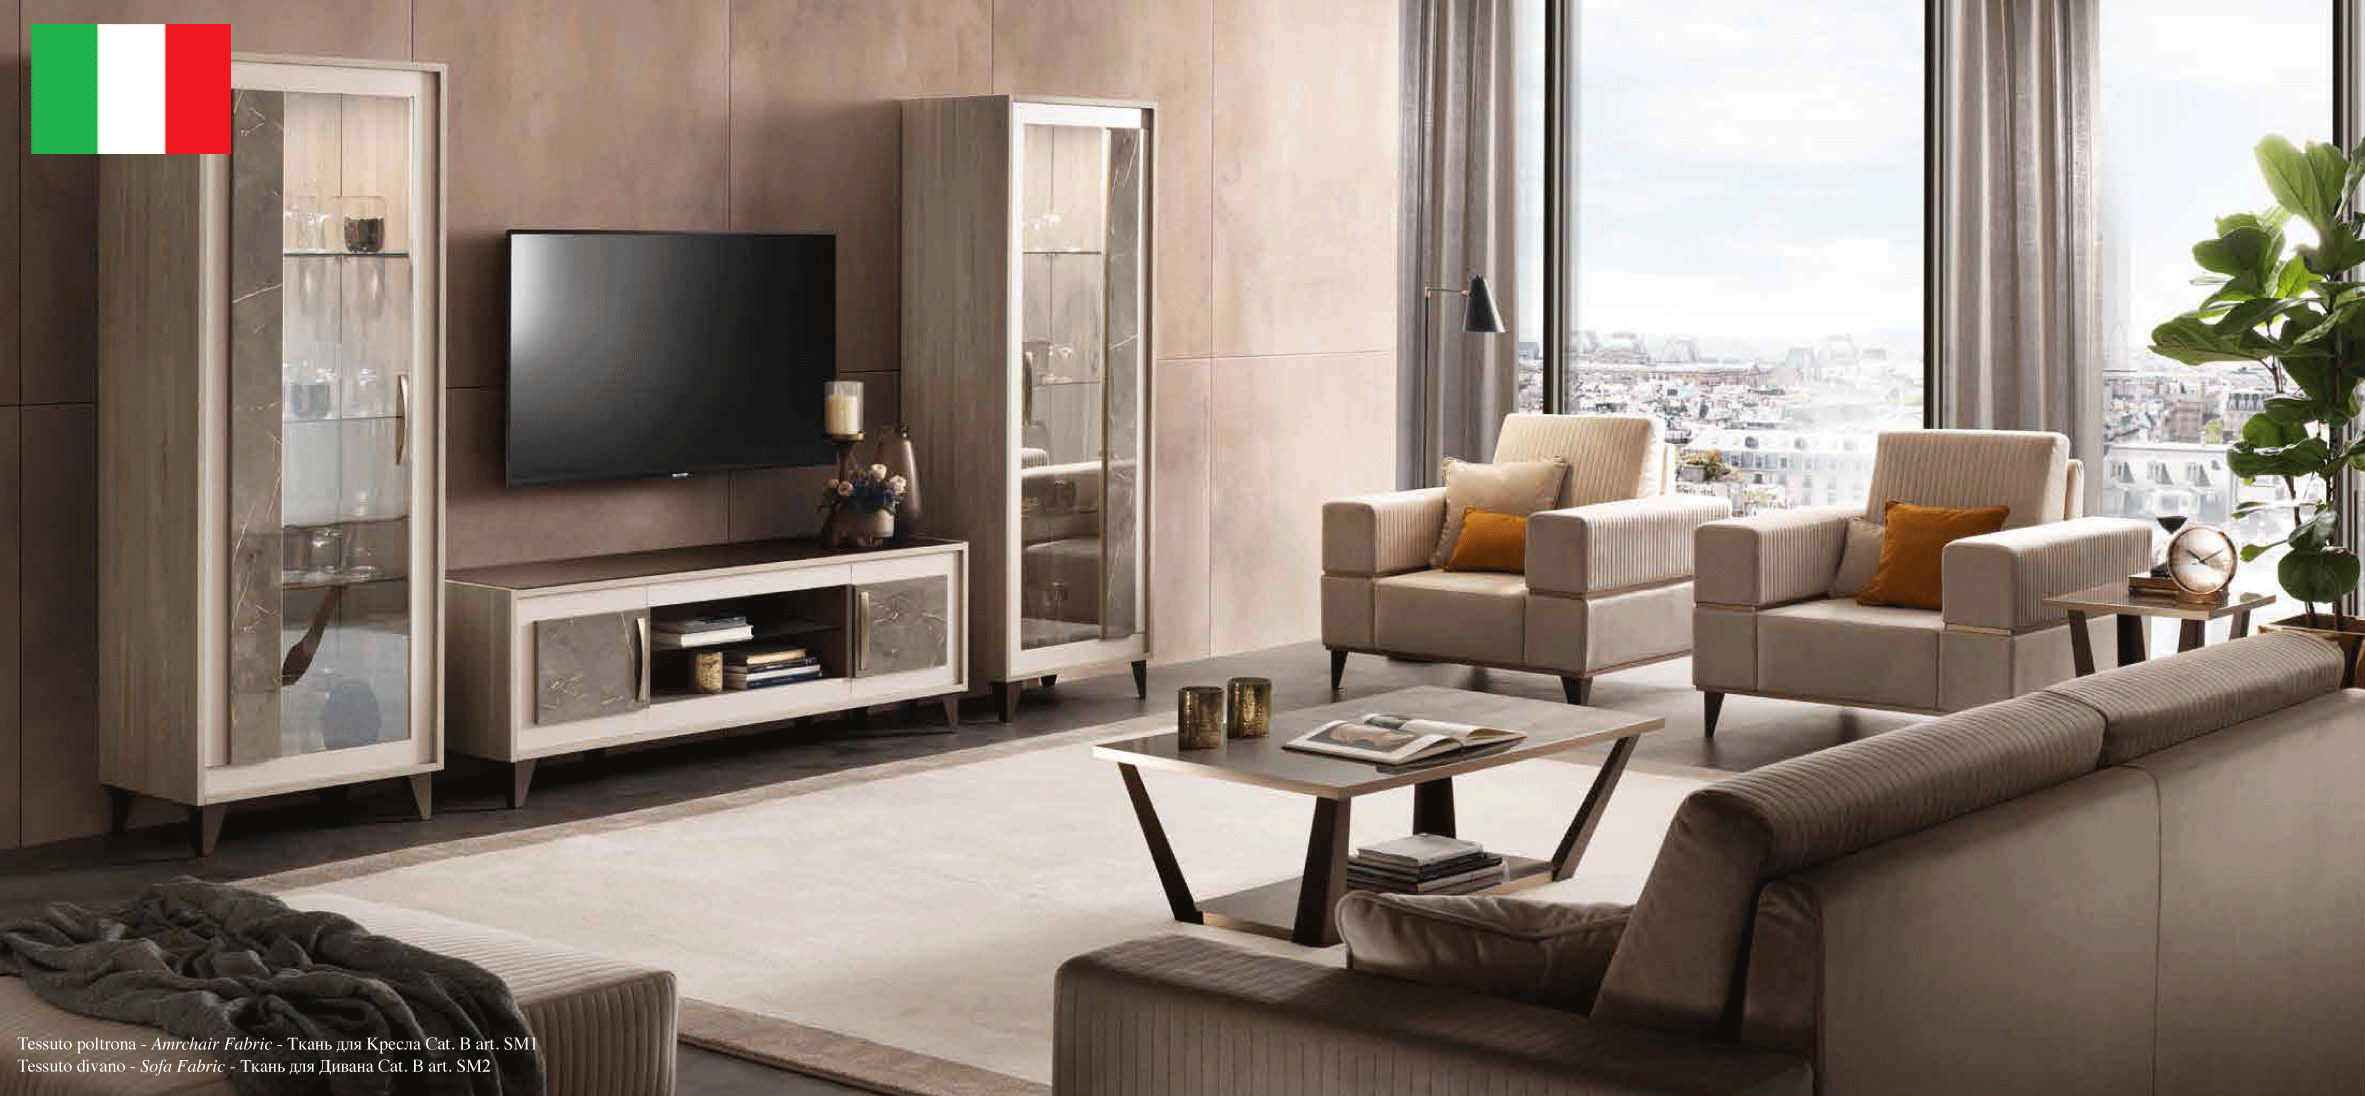 Brands Status Modern Collections, Italy ArredoAmbra Entertainment Center by Arredoclassic, Italy